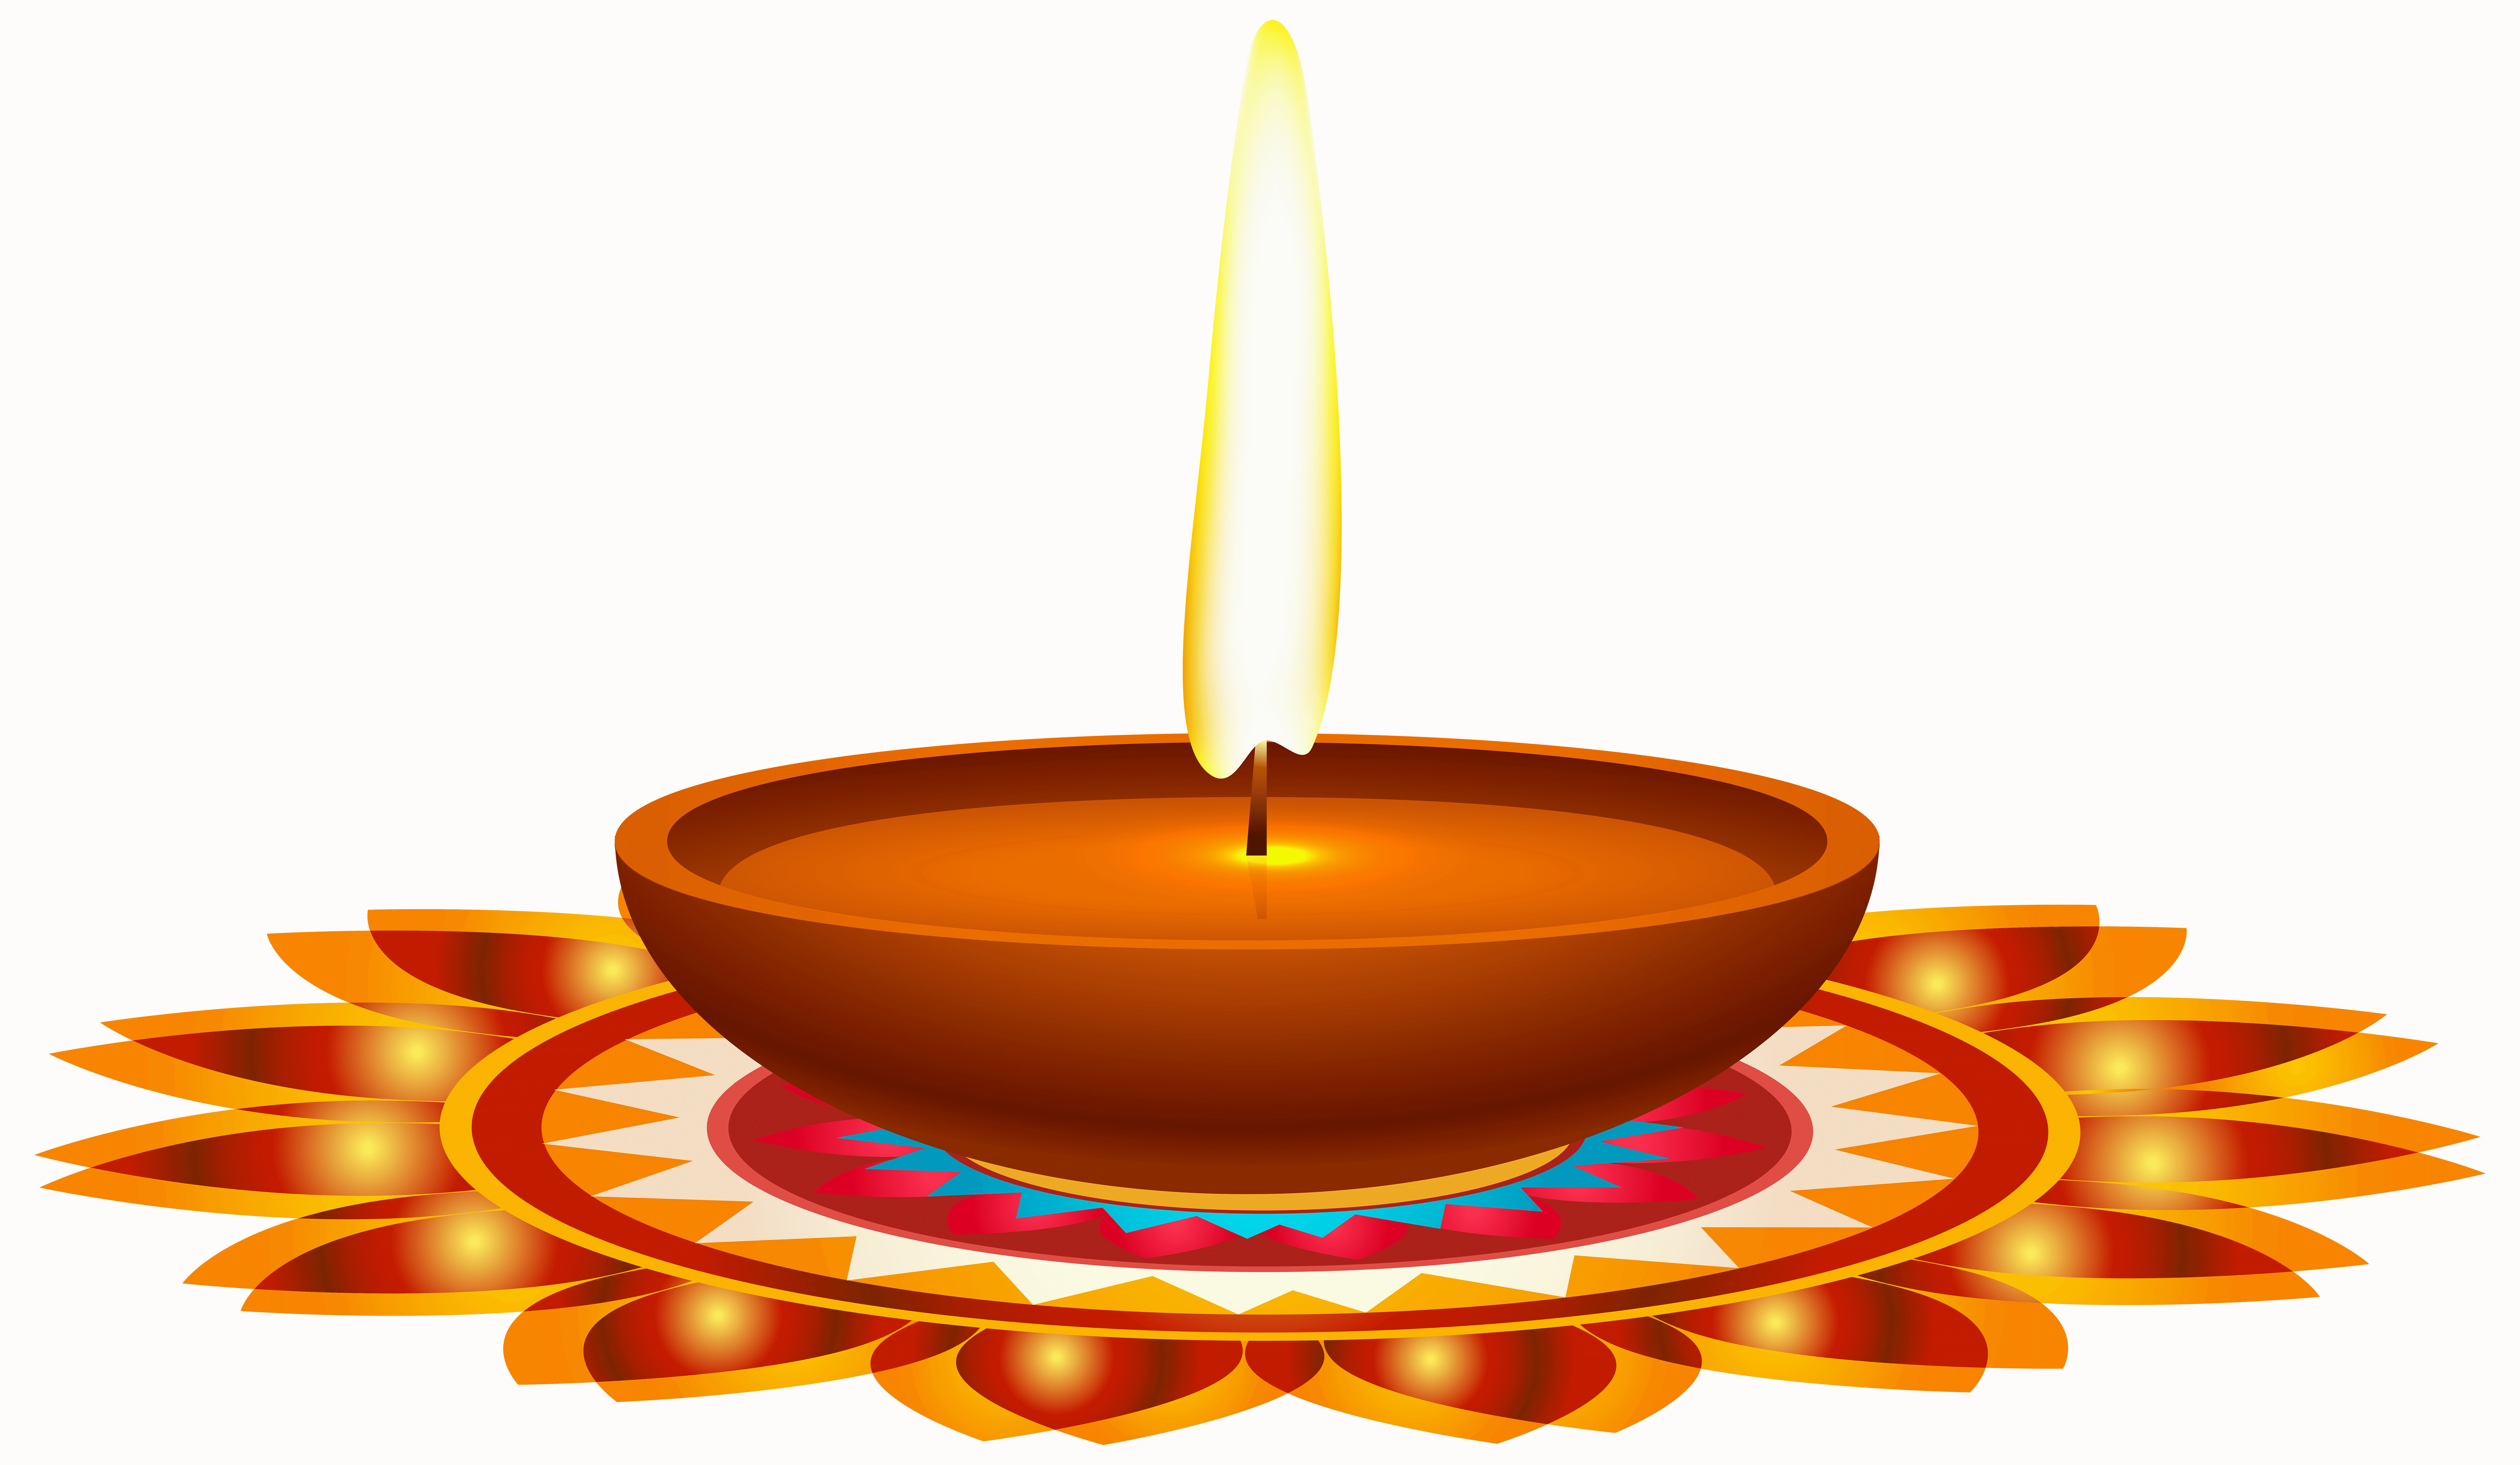 A Lit Candle On A Colorful Design